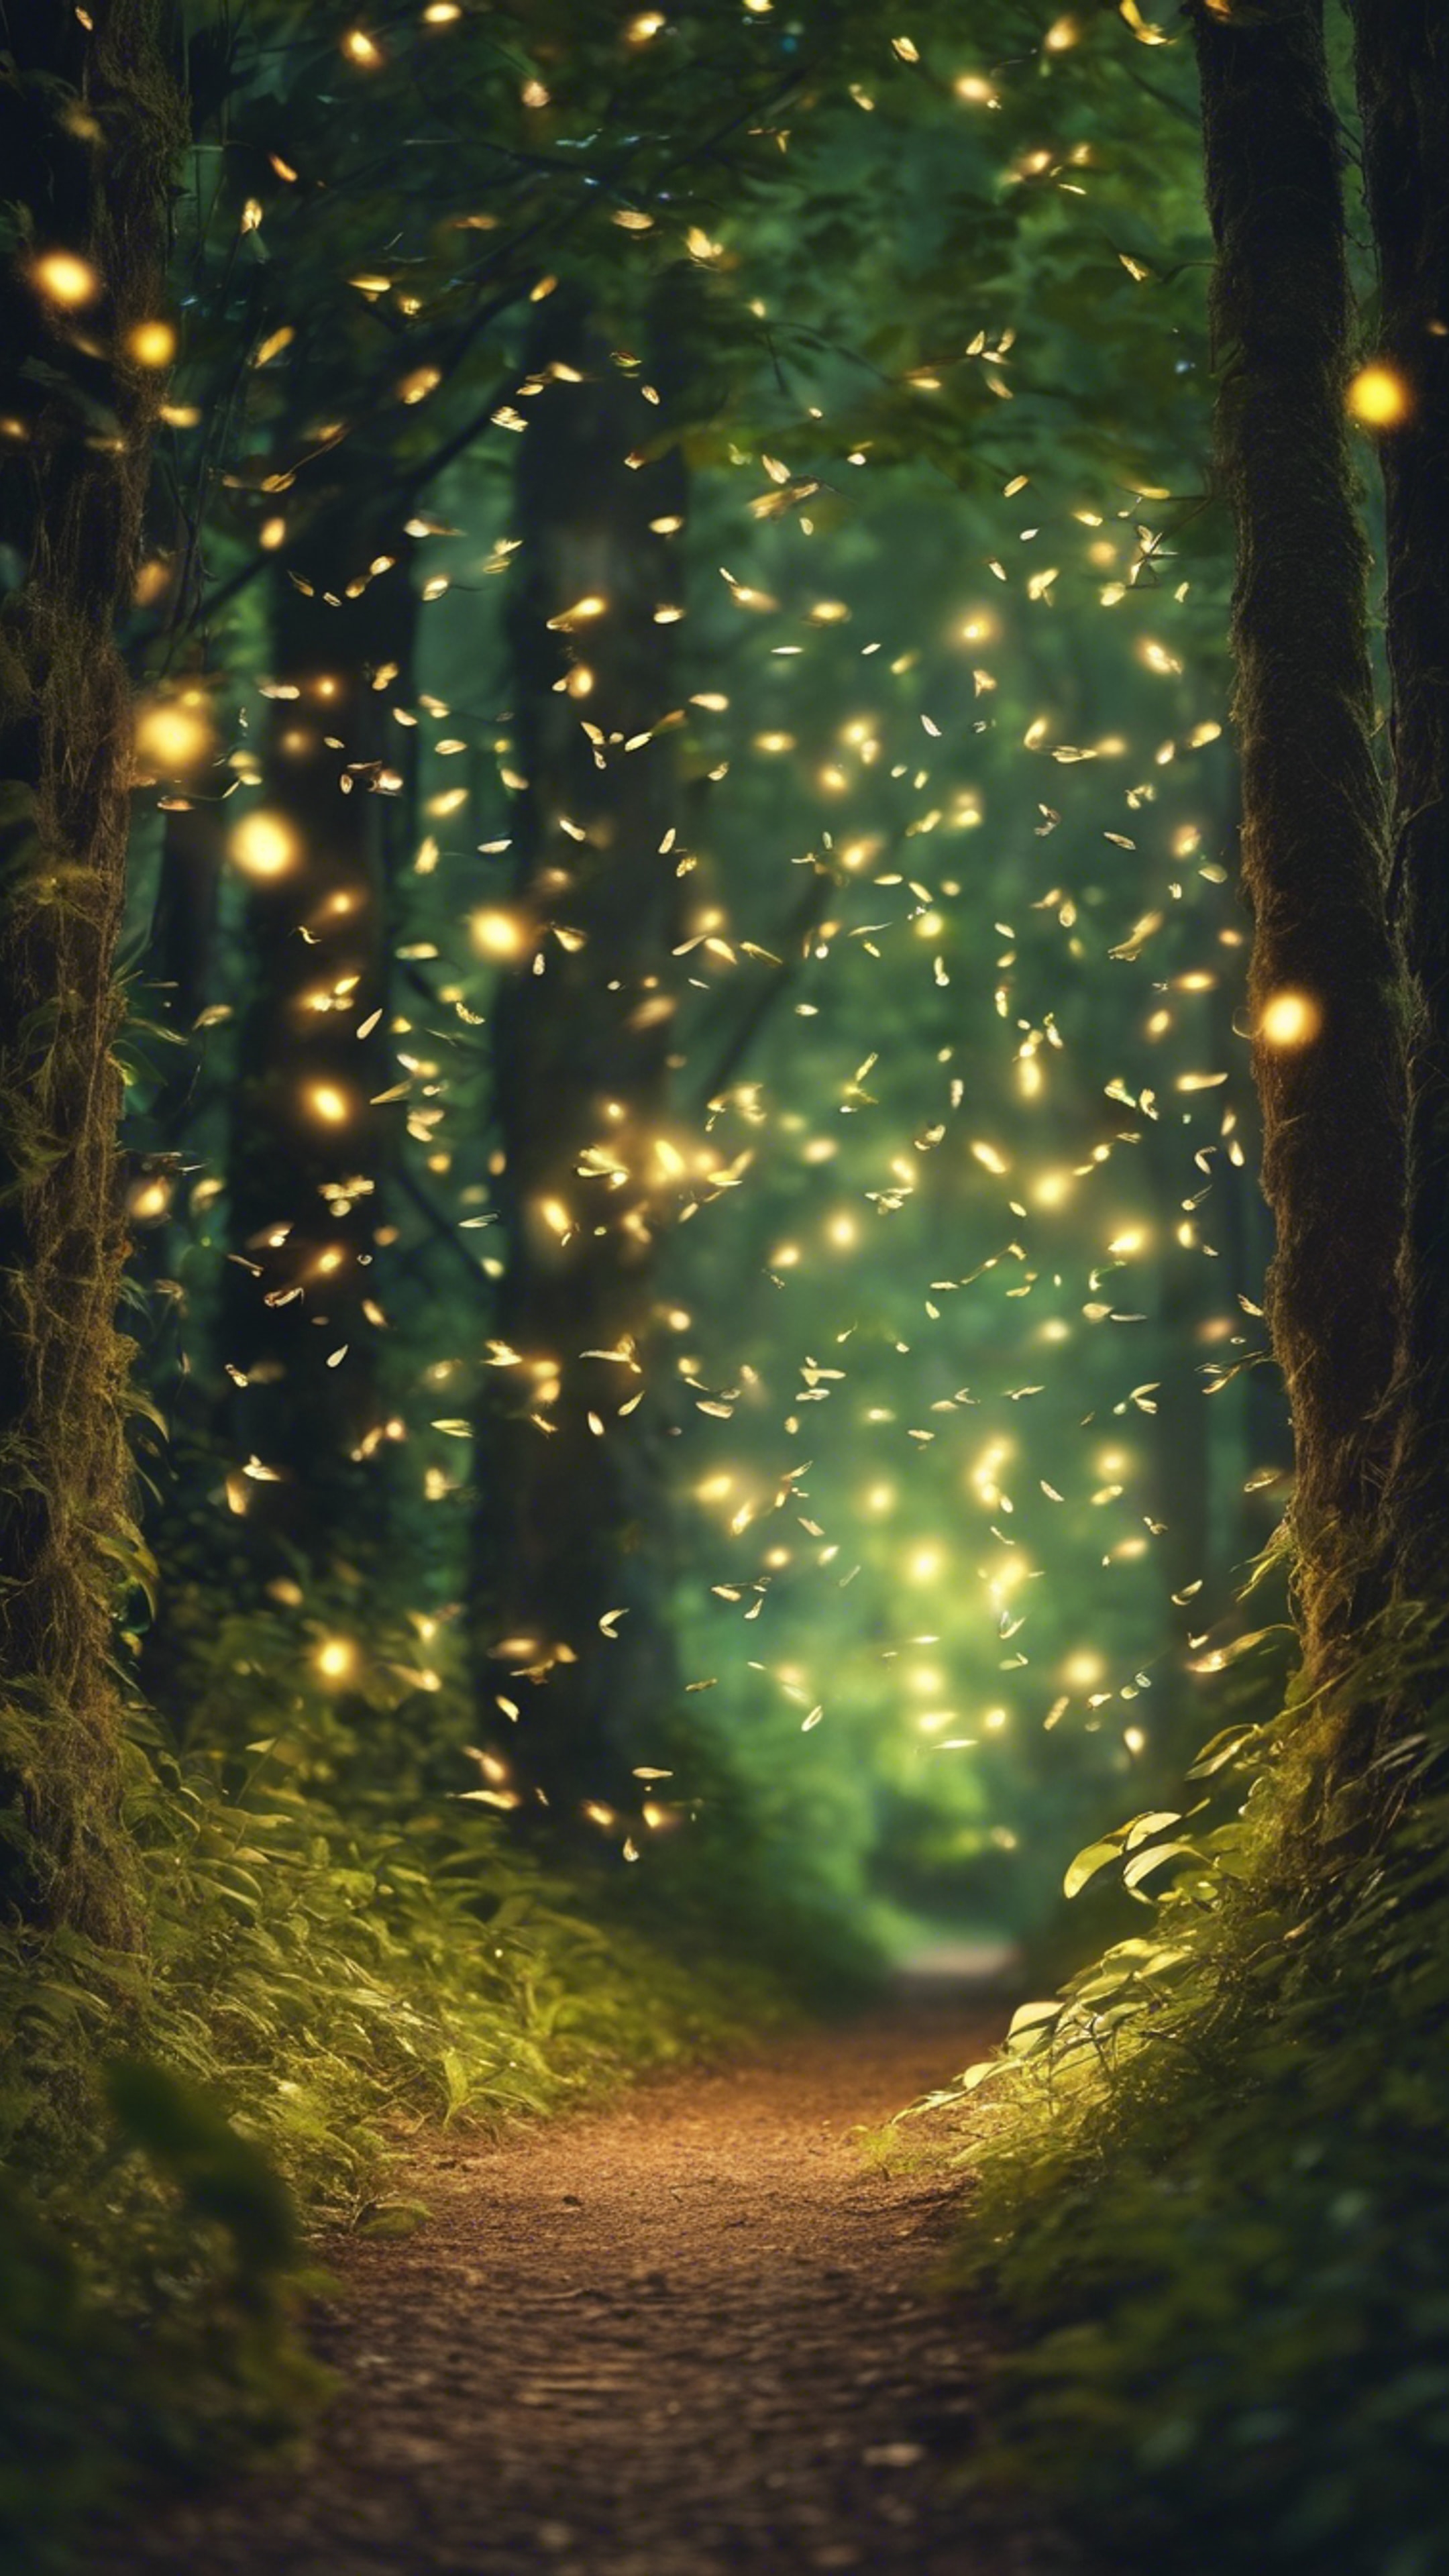 An enchanting forest path illuminated by the mystical glow of fireflies and the soft, natural light filtering through the overhead canopy of leaves. Hintergrund[4b115bf911ac49cd855d]